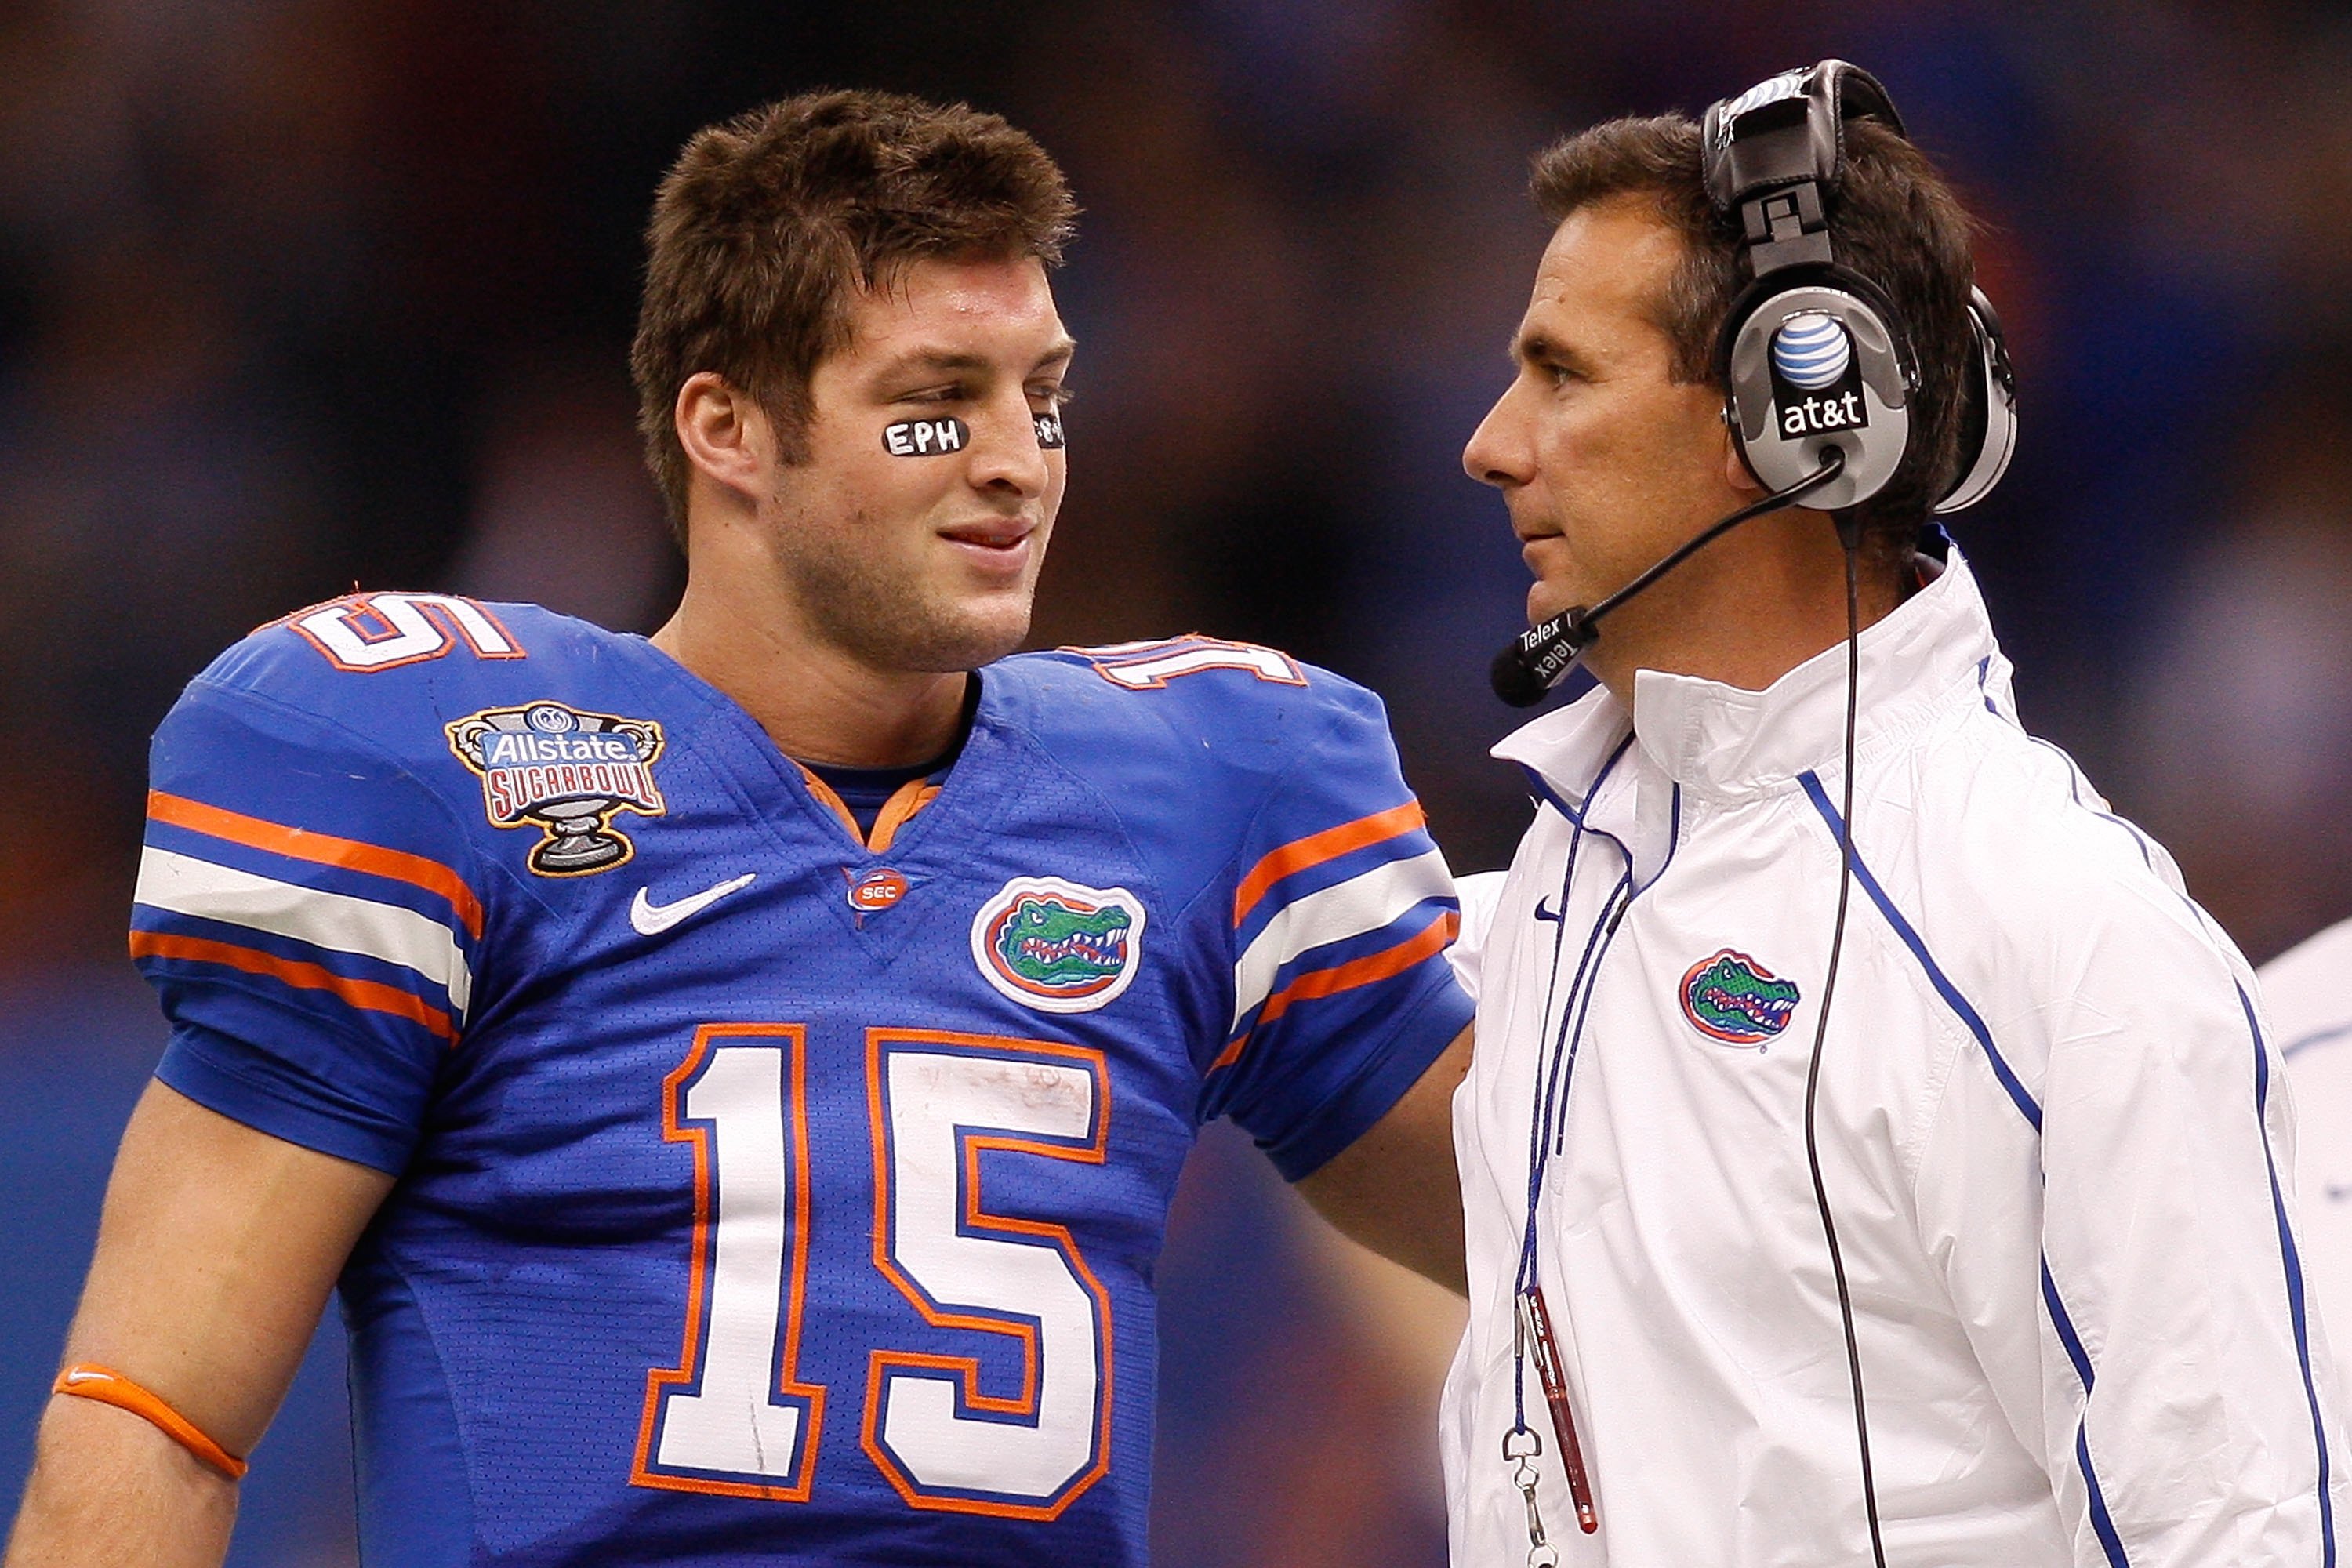 Hall of Famer Jack Youngblood Claims Urban Meyer 'Used' Tim Tebow